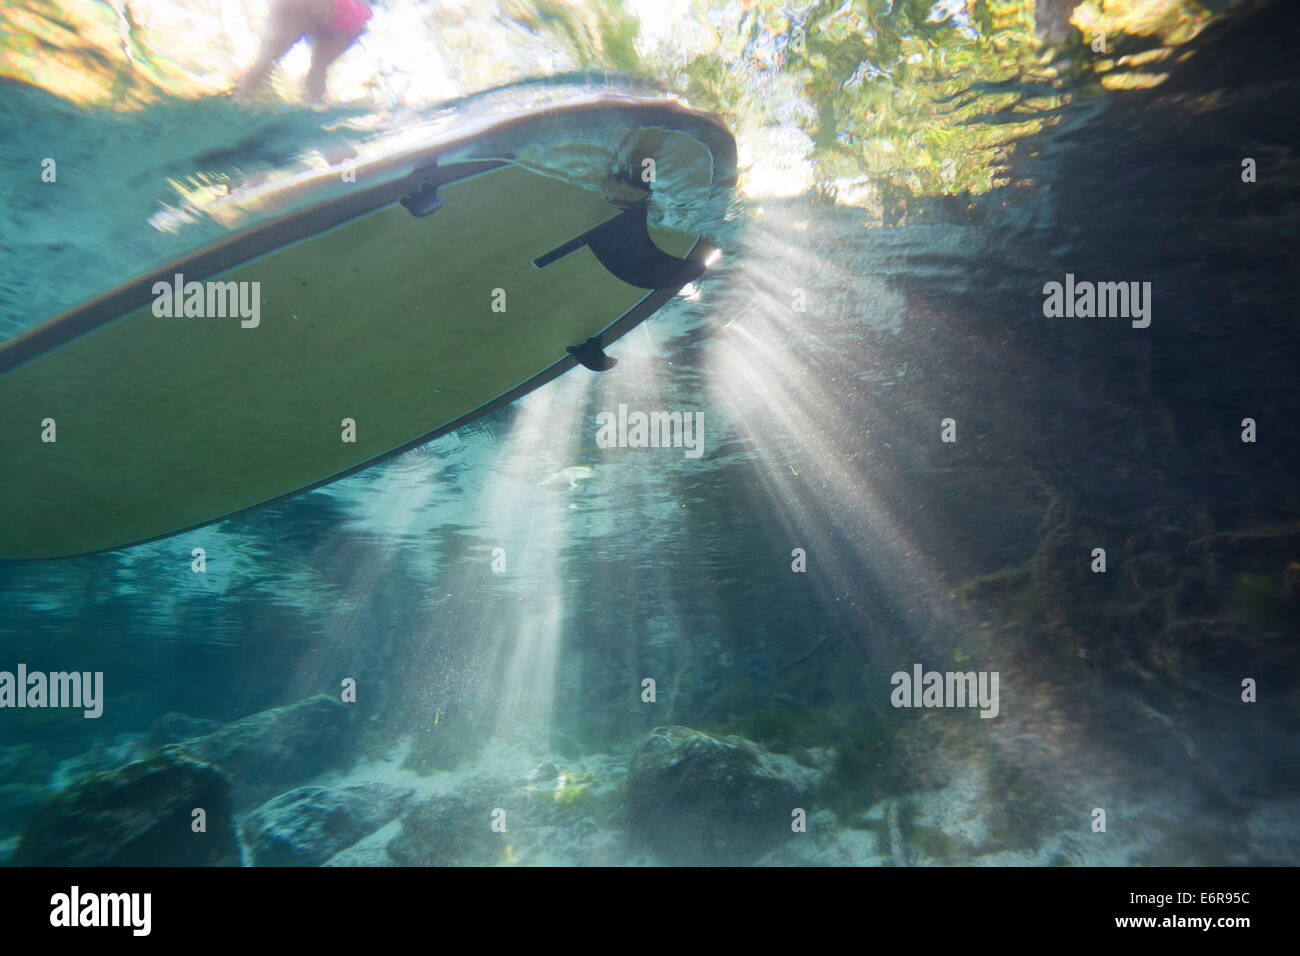 Underwater Image with the photographer looking up at the stand up paddle board on the surface in crystal clear water Stock Photo